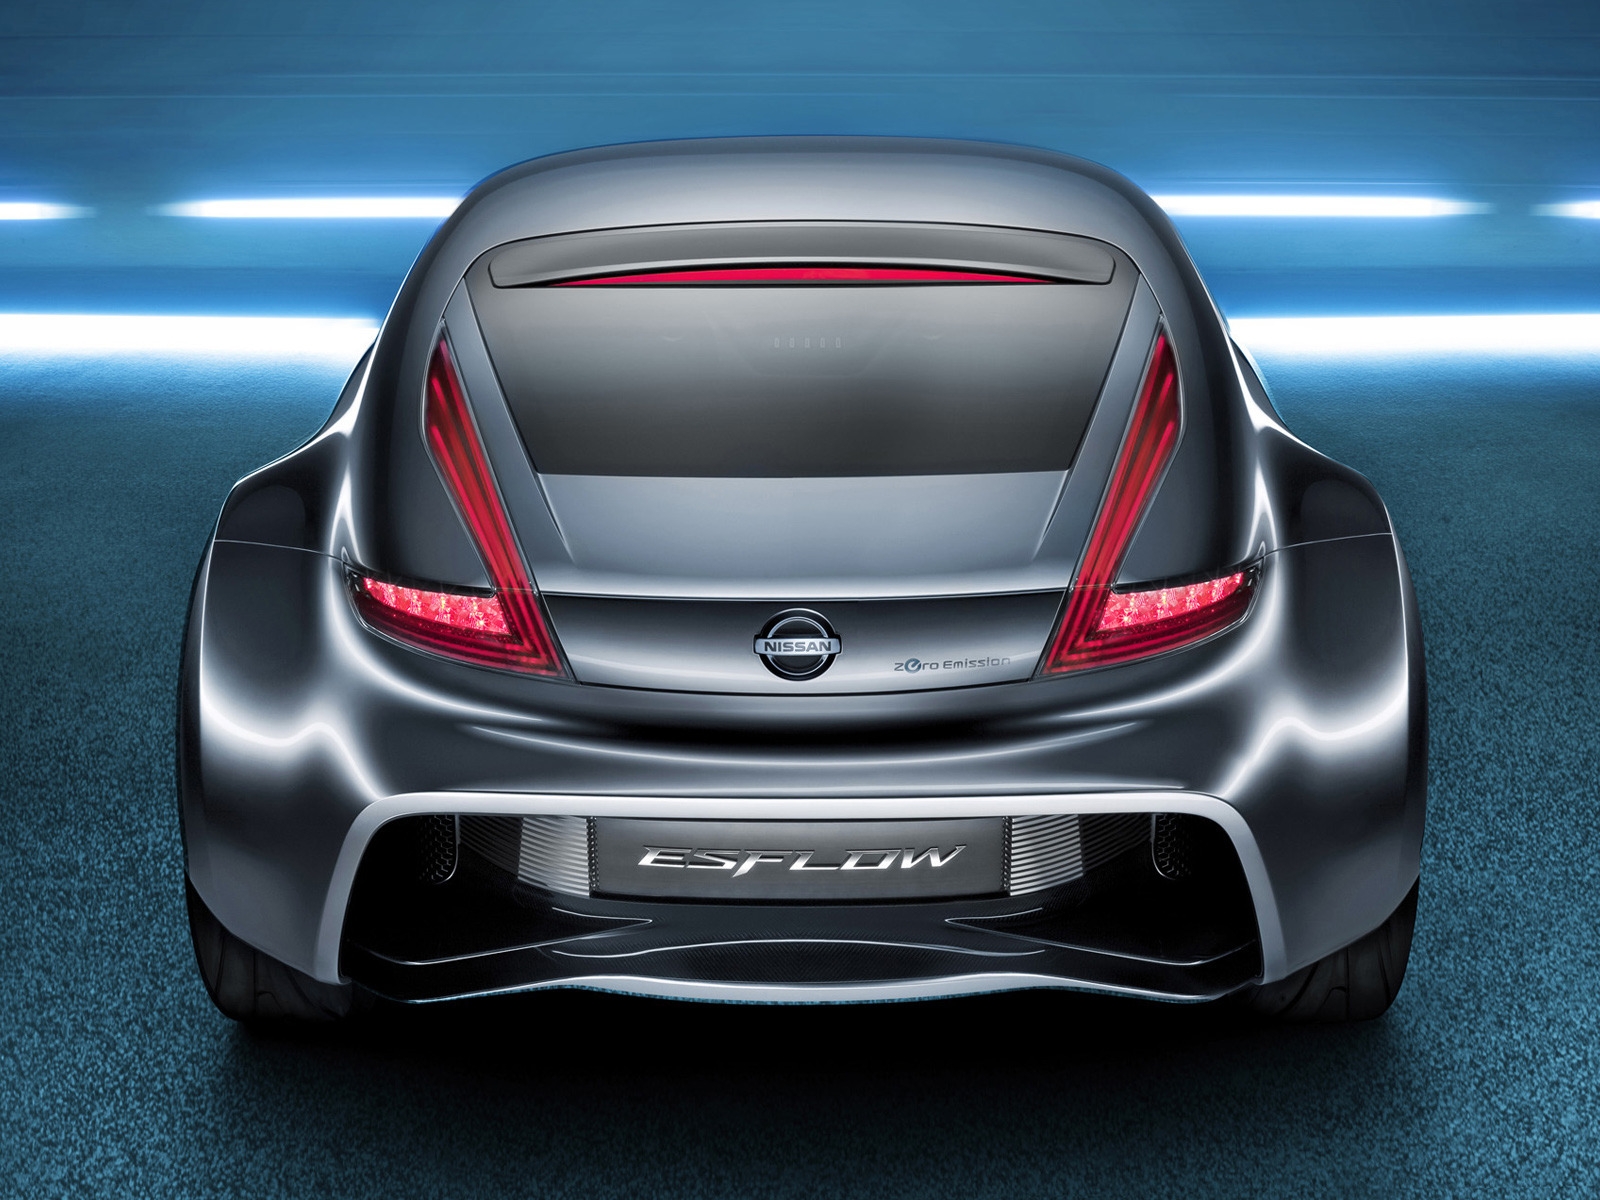 Nissan Esflow Concept Rear for 1600 x 1200 resolution